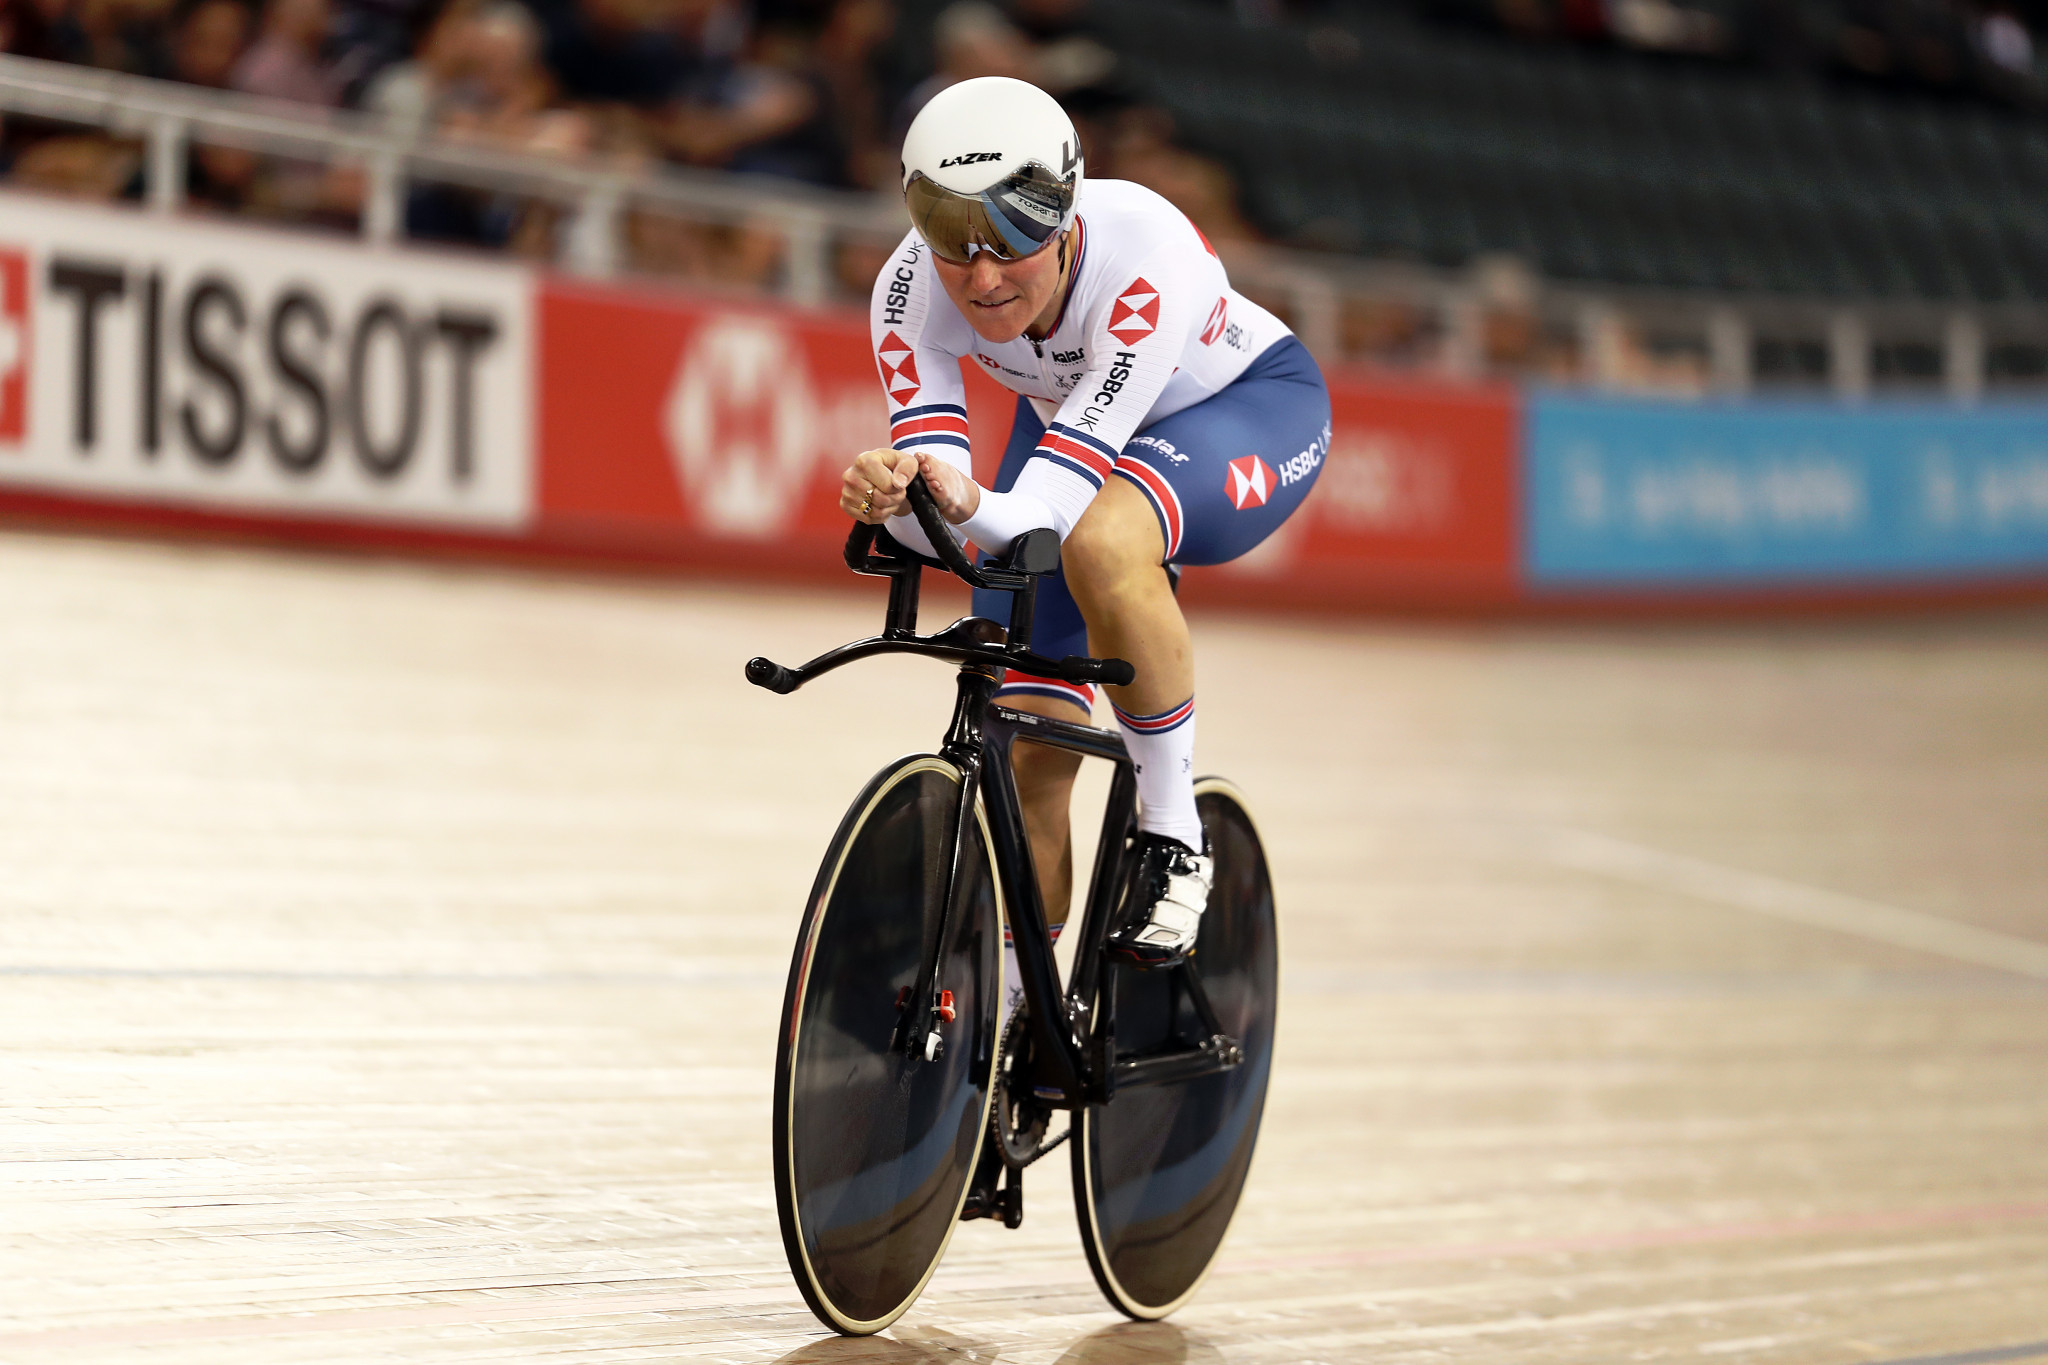 Storey seeking 14th title at Para Cycling Track World Championships in Apeldoorn